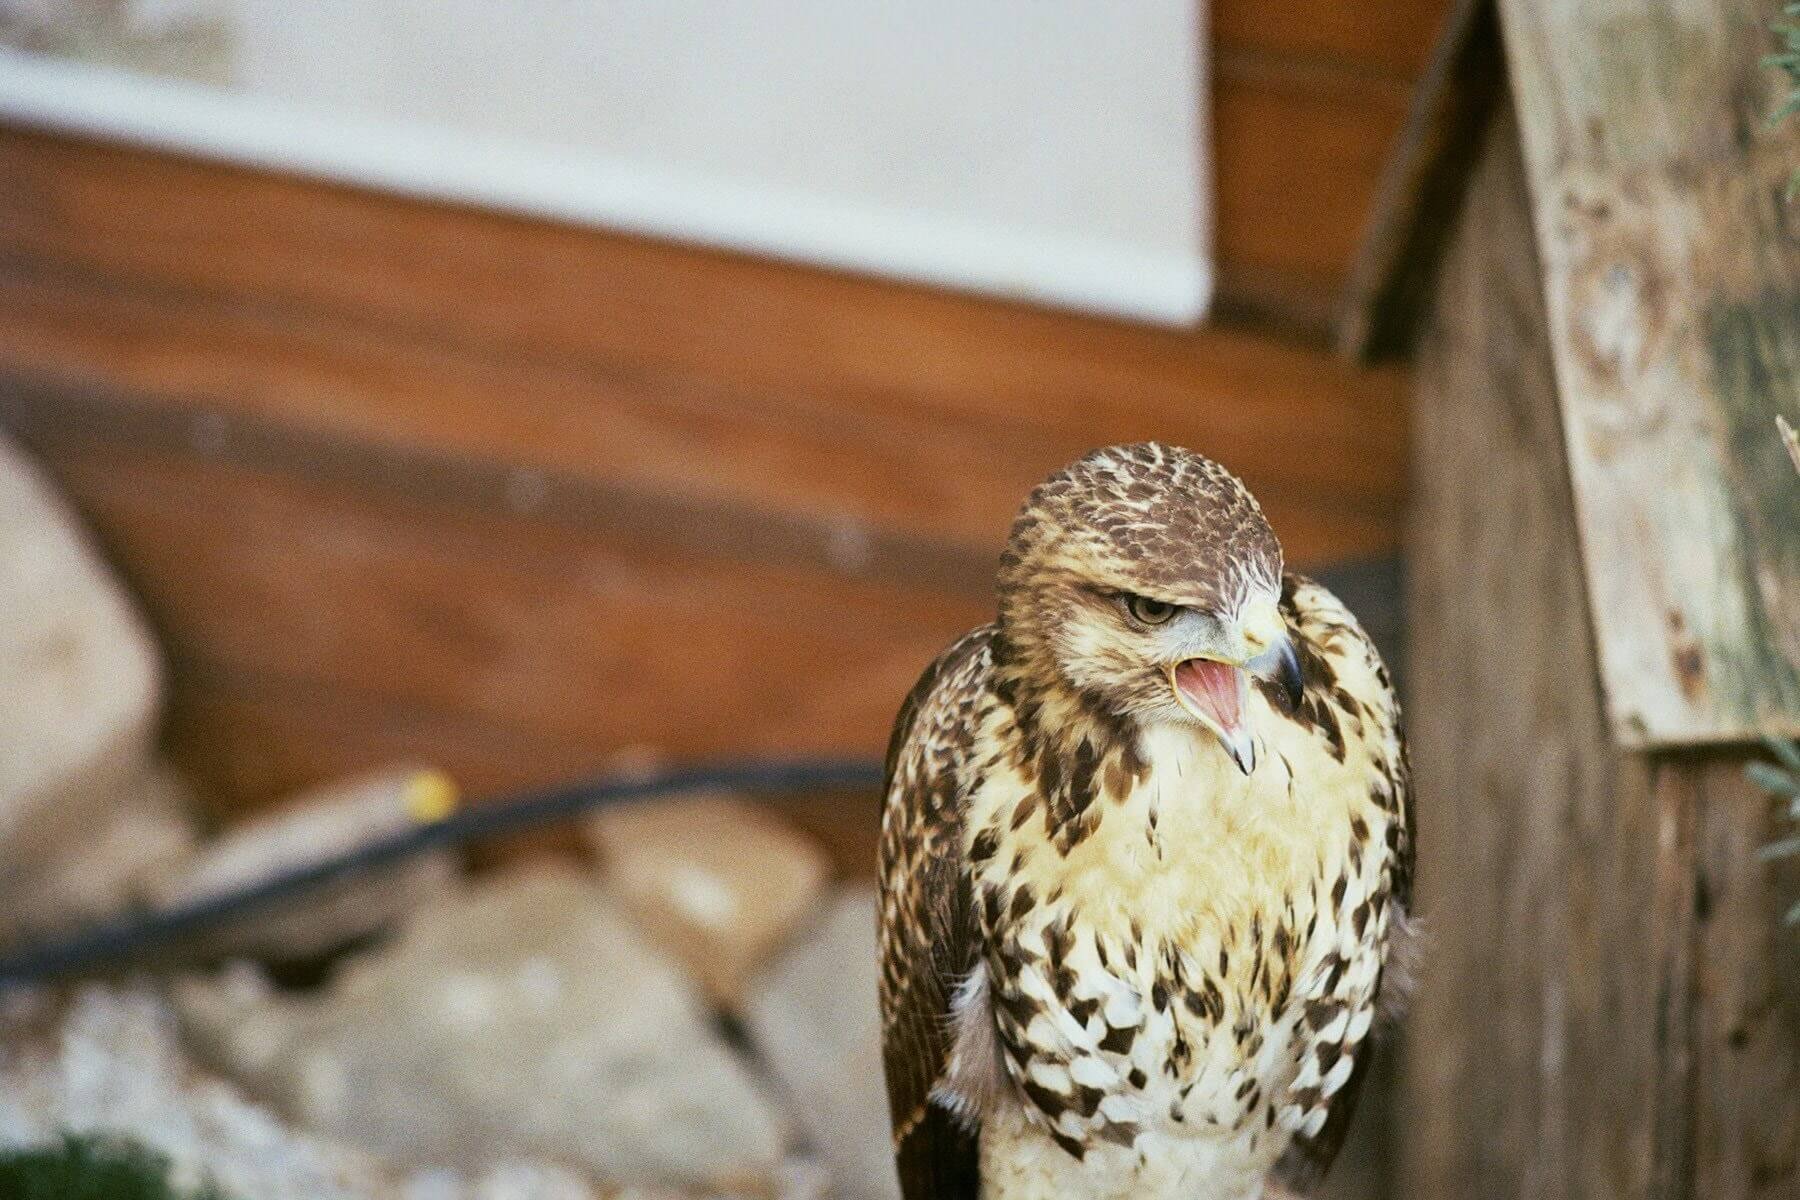 Photo of a falcon with its beak open